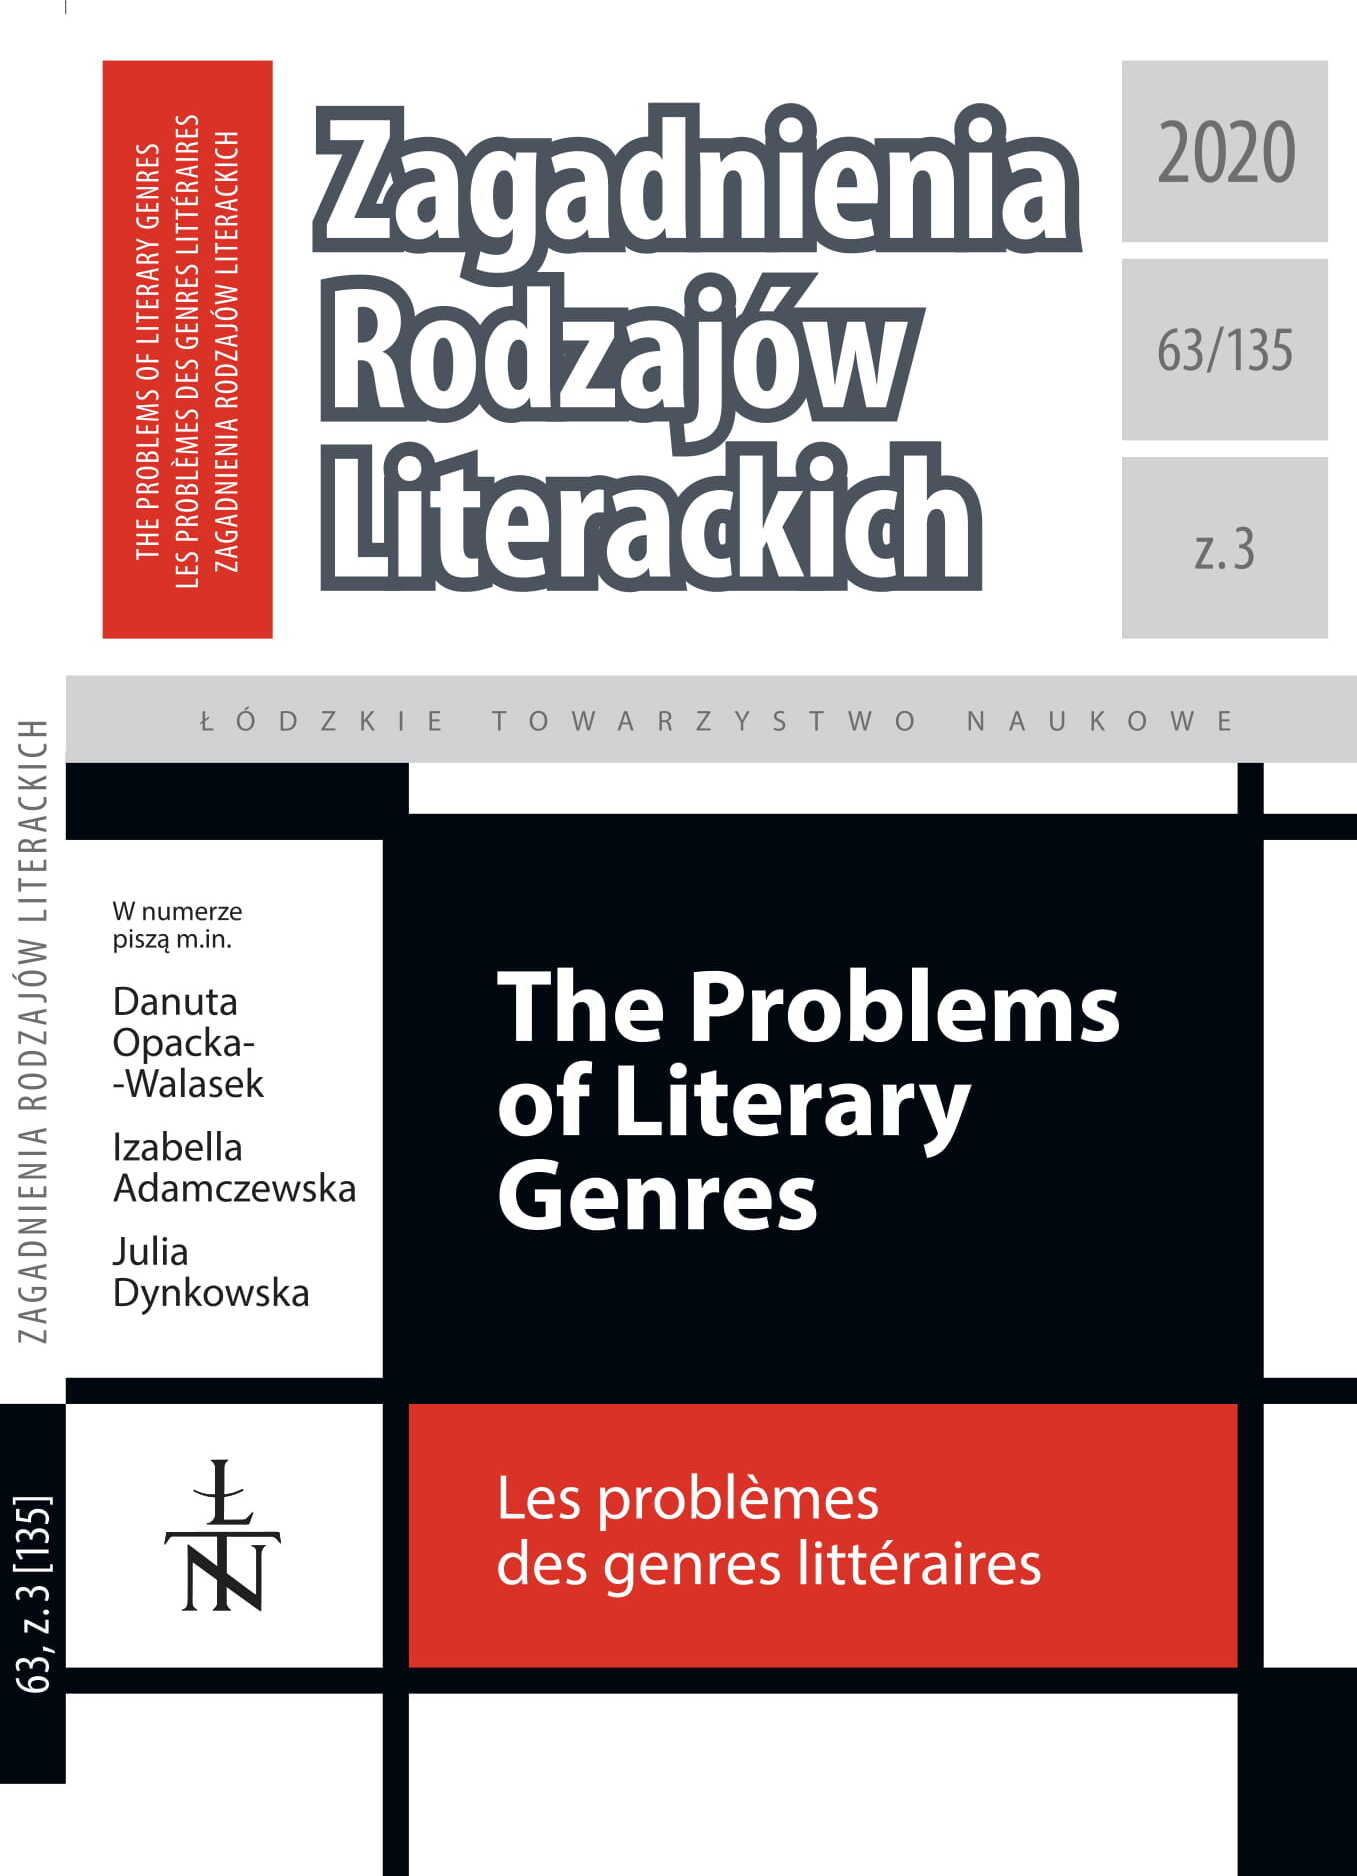 Cover Studies (okładkoznawstwo) — Old Issue, New Research Conception Cover Image